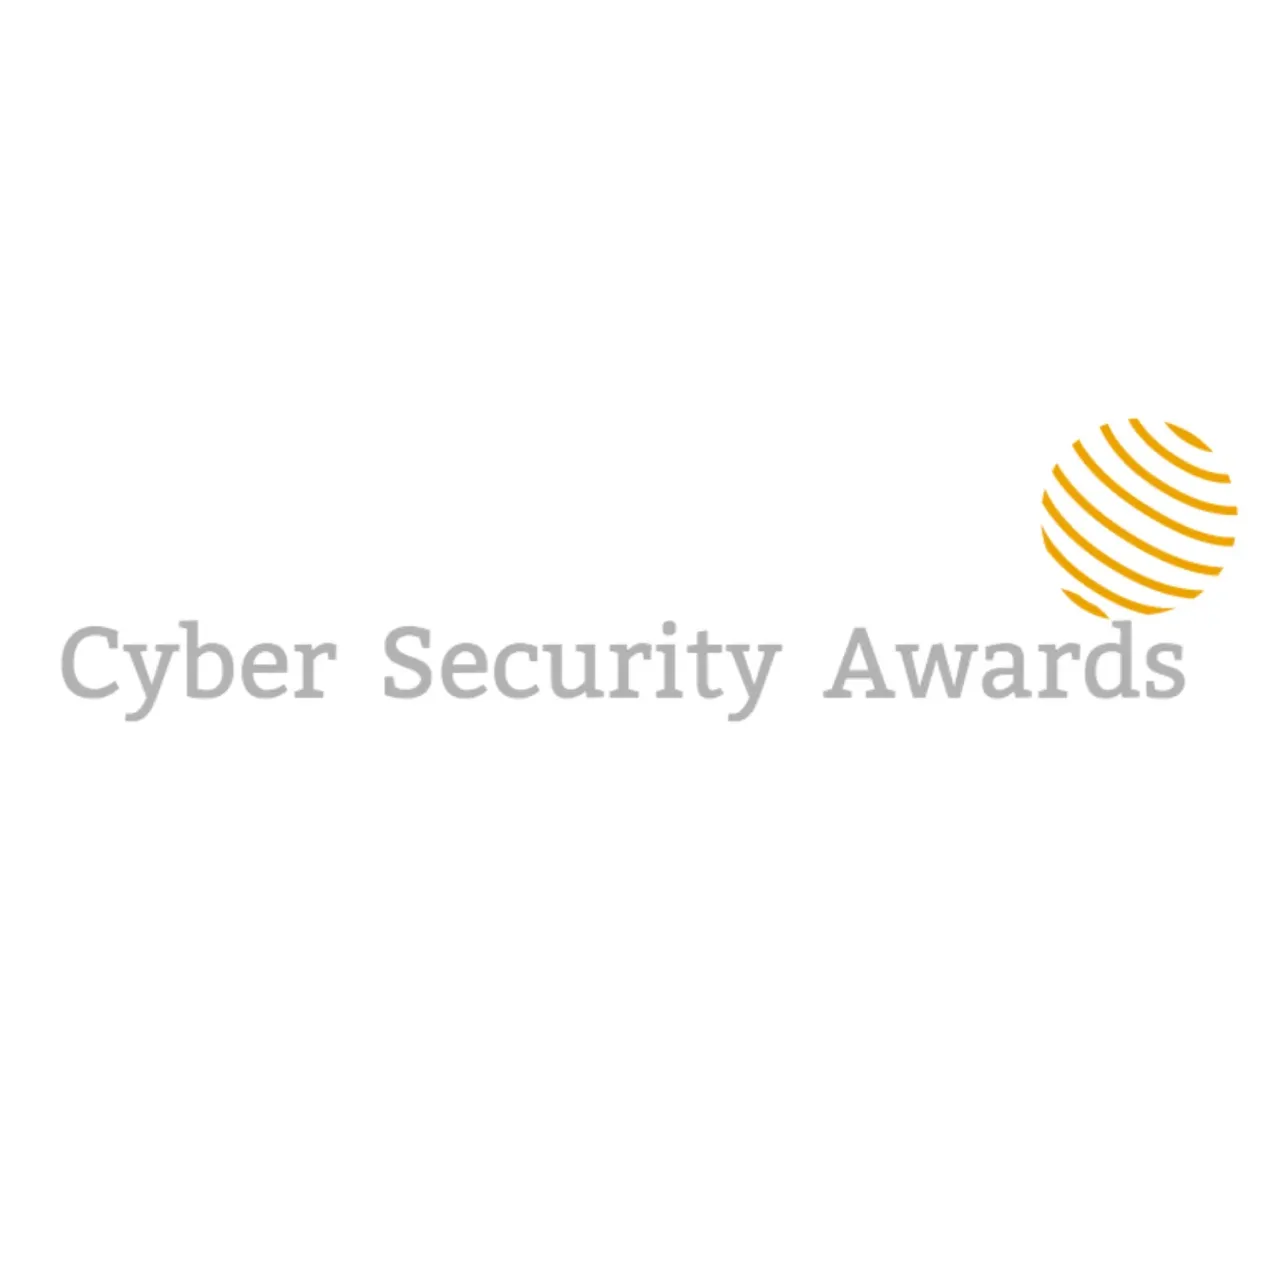 Uniac reaches the final of 2016 Cyber Security Awards